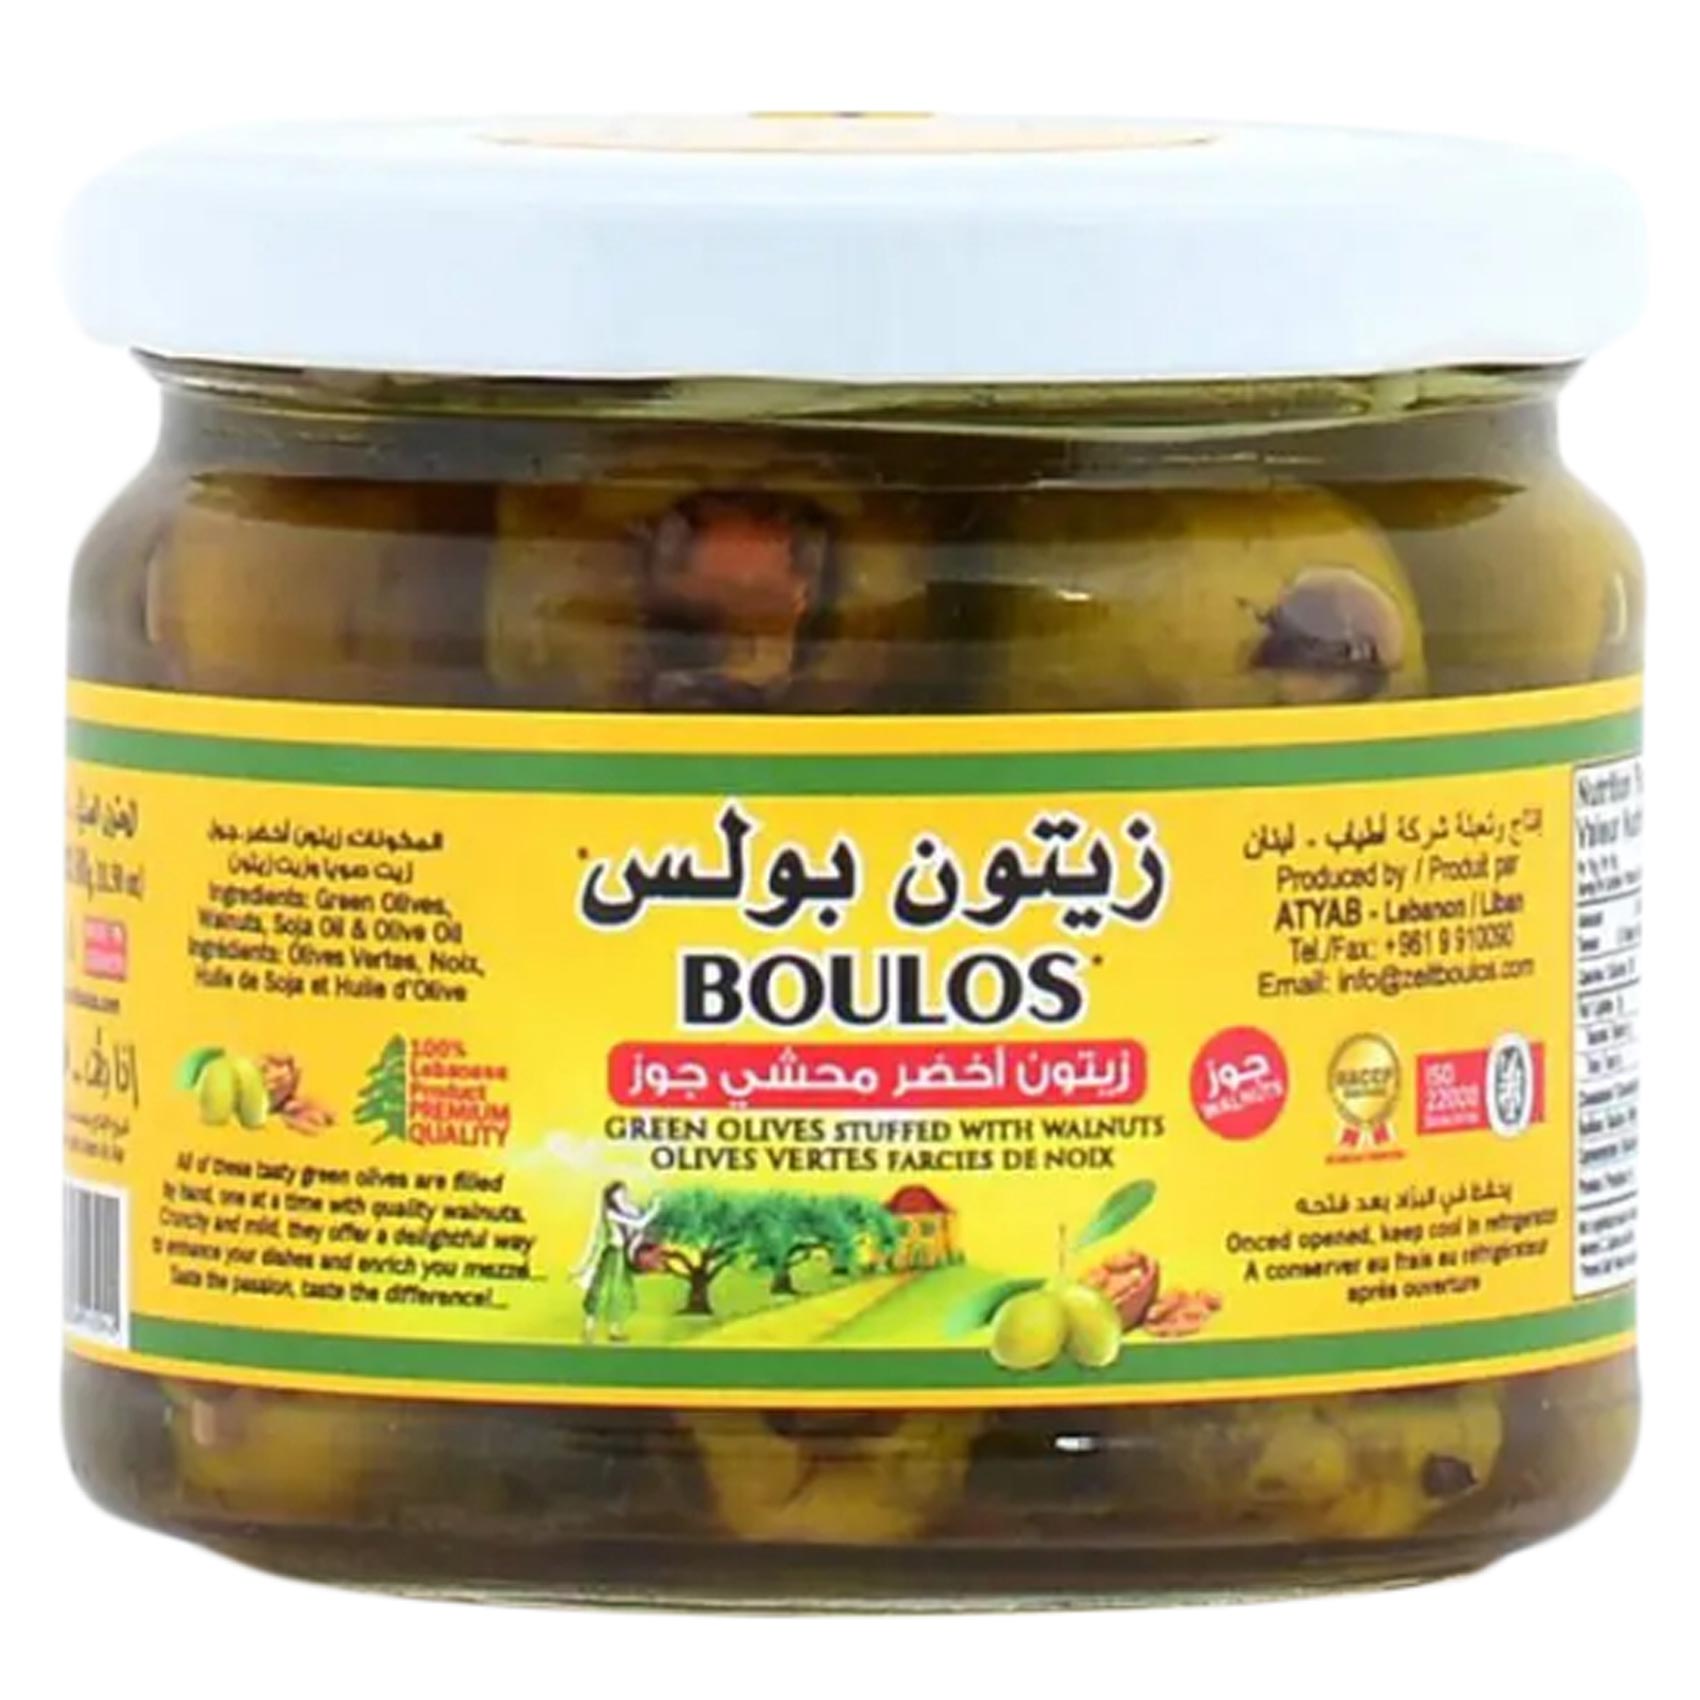 Boulos Green Olives 300g